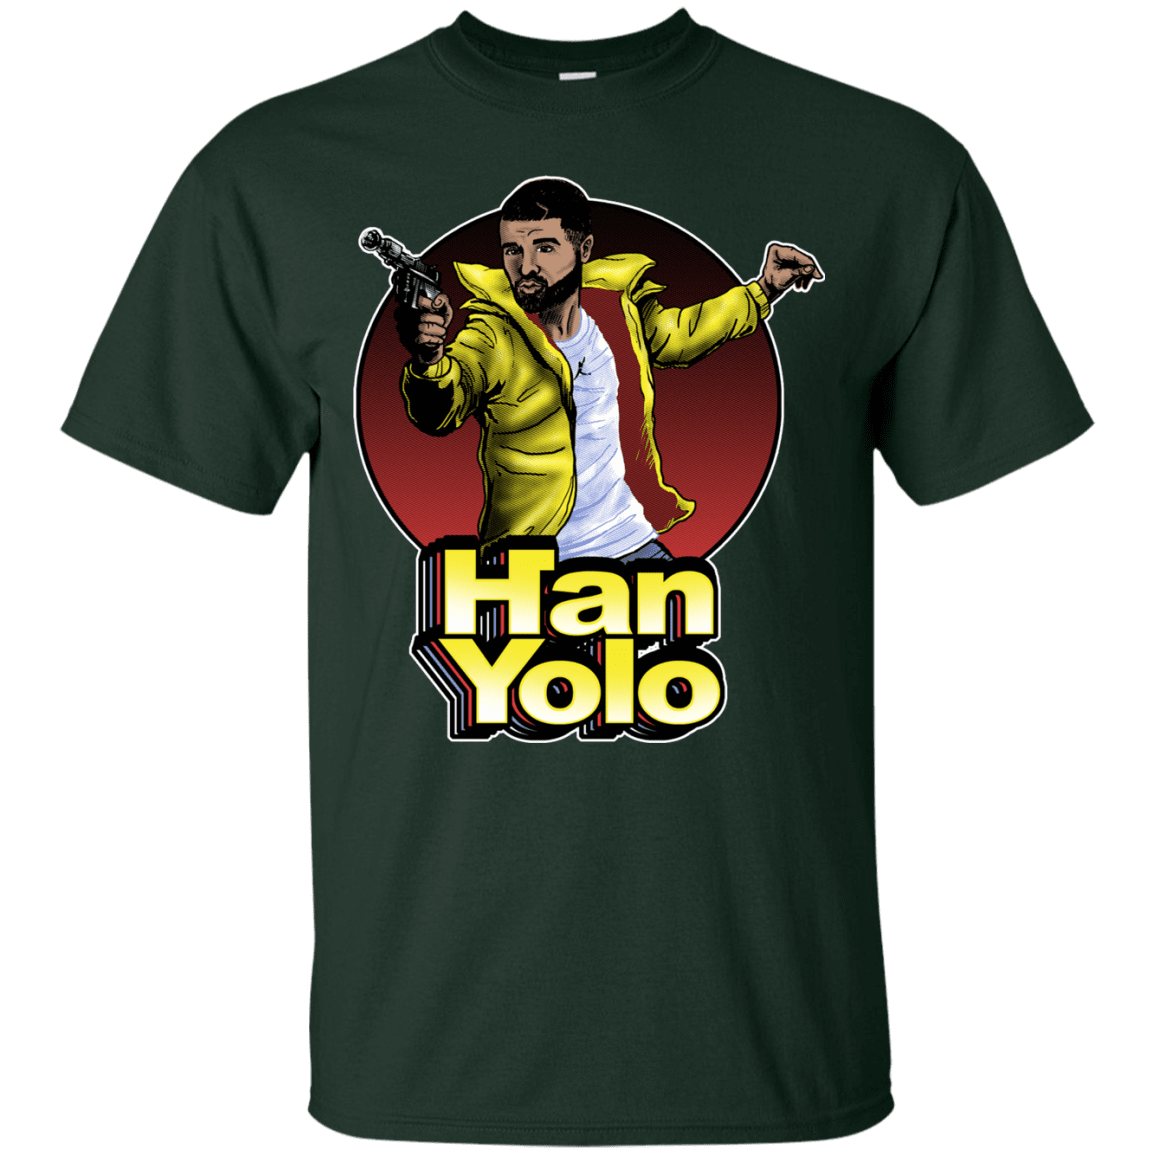 T-Shirts Forest / S Han Yolo T-Shirt